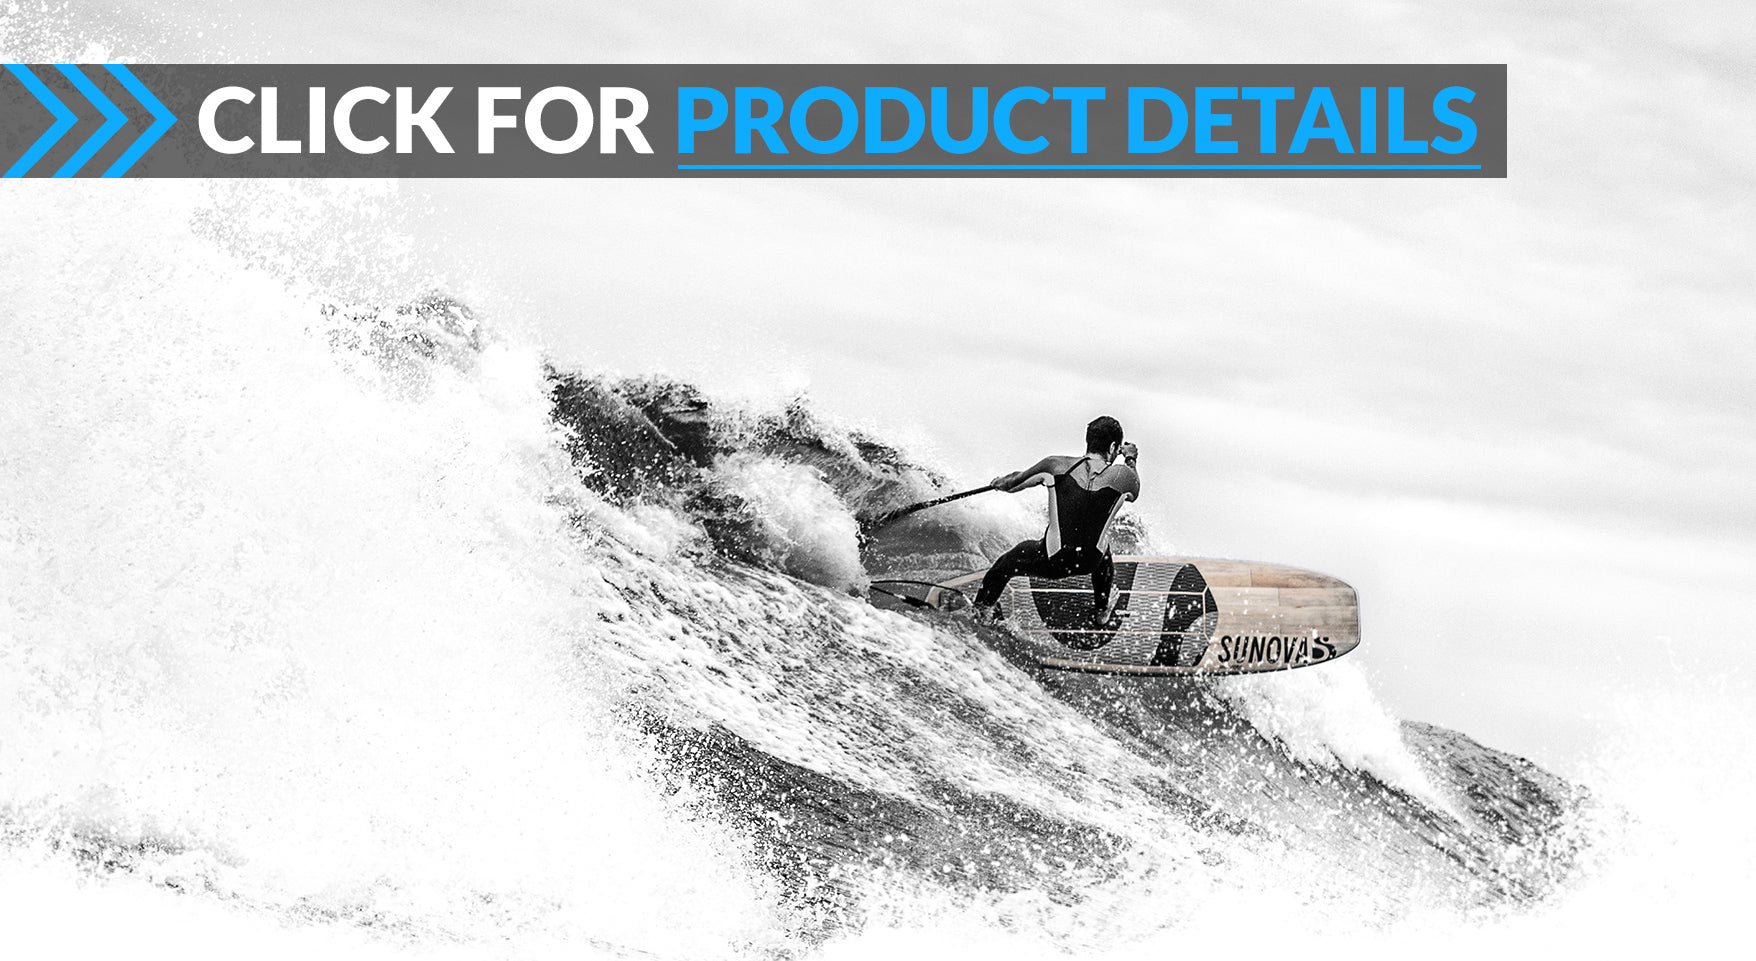 SUP Surfing Product Details